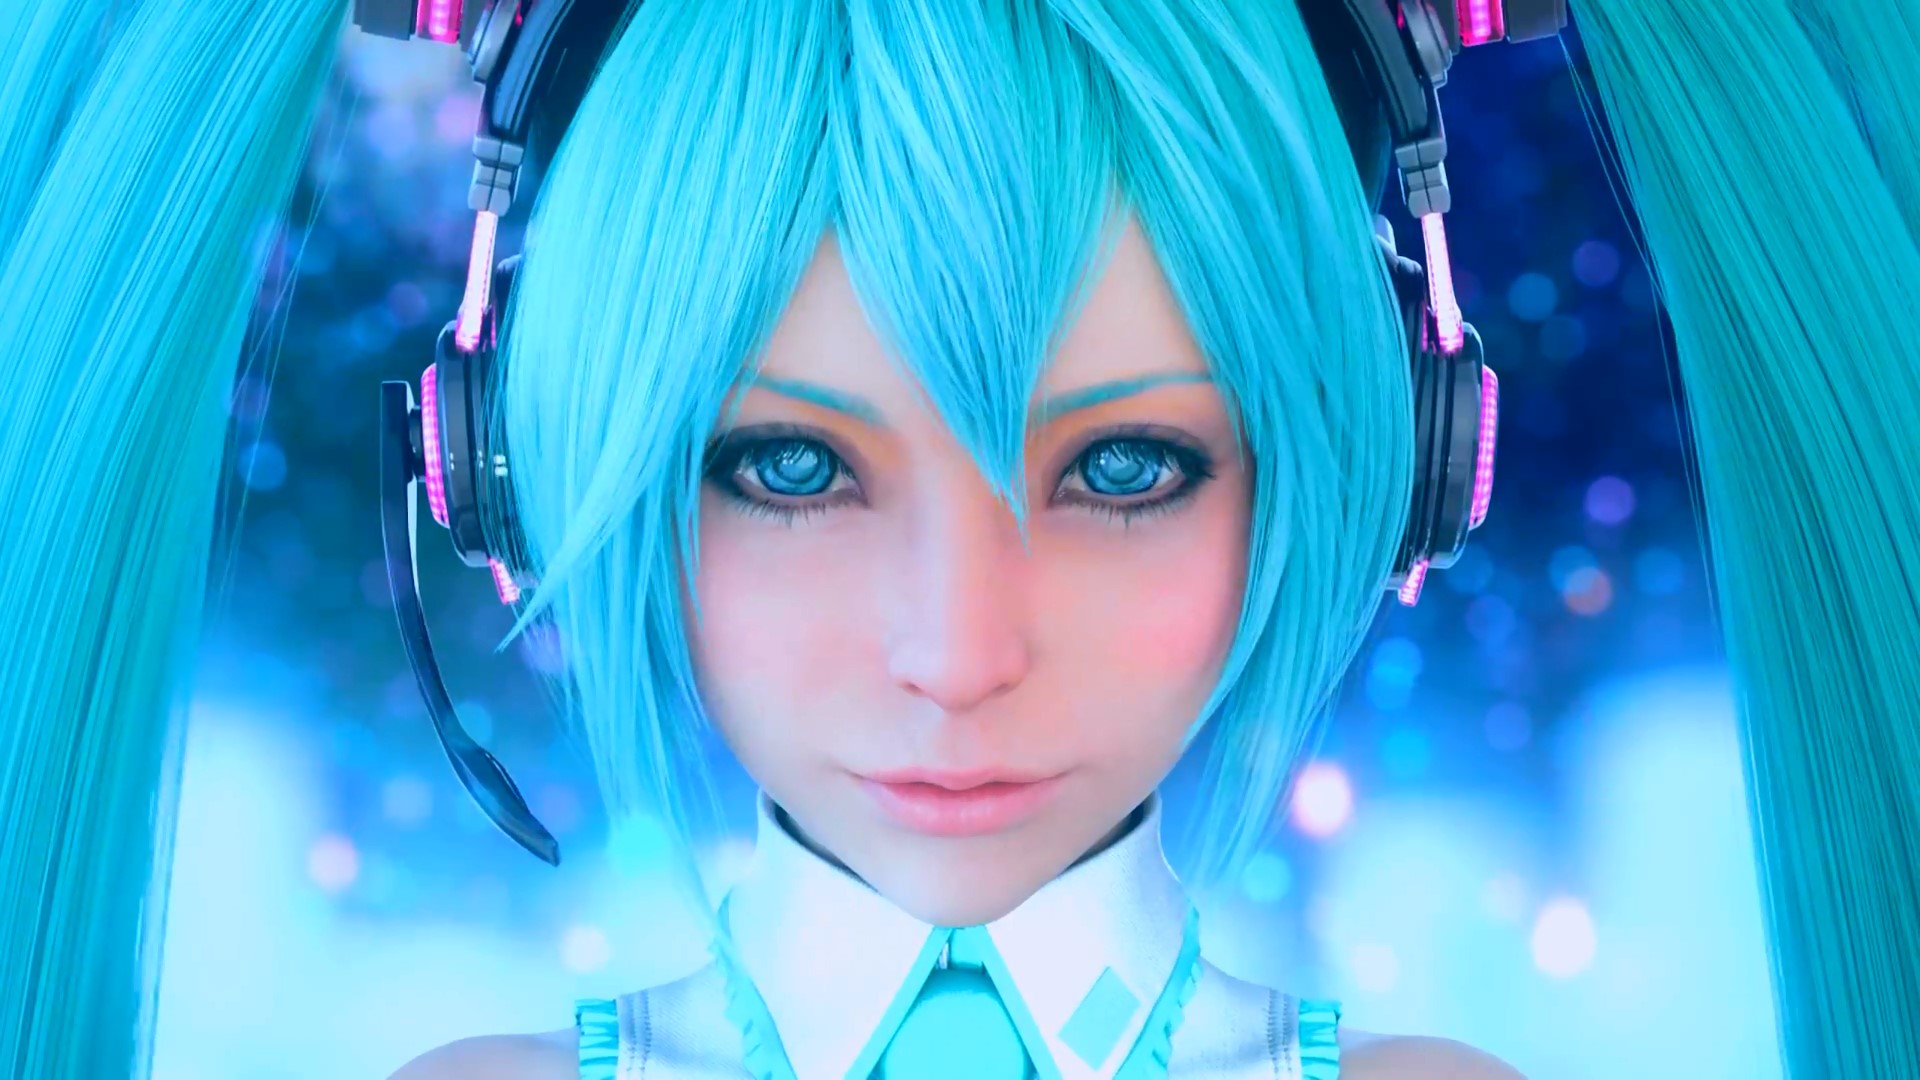 Hatsune Miku is Practically REAL with Square Enix’s Graphics Technology!